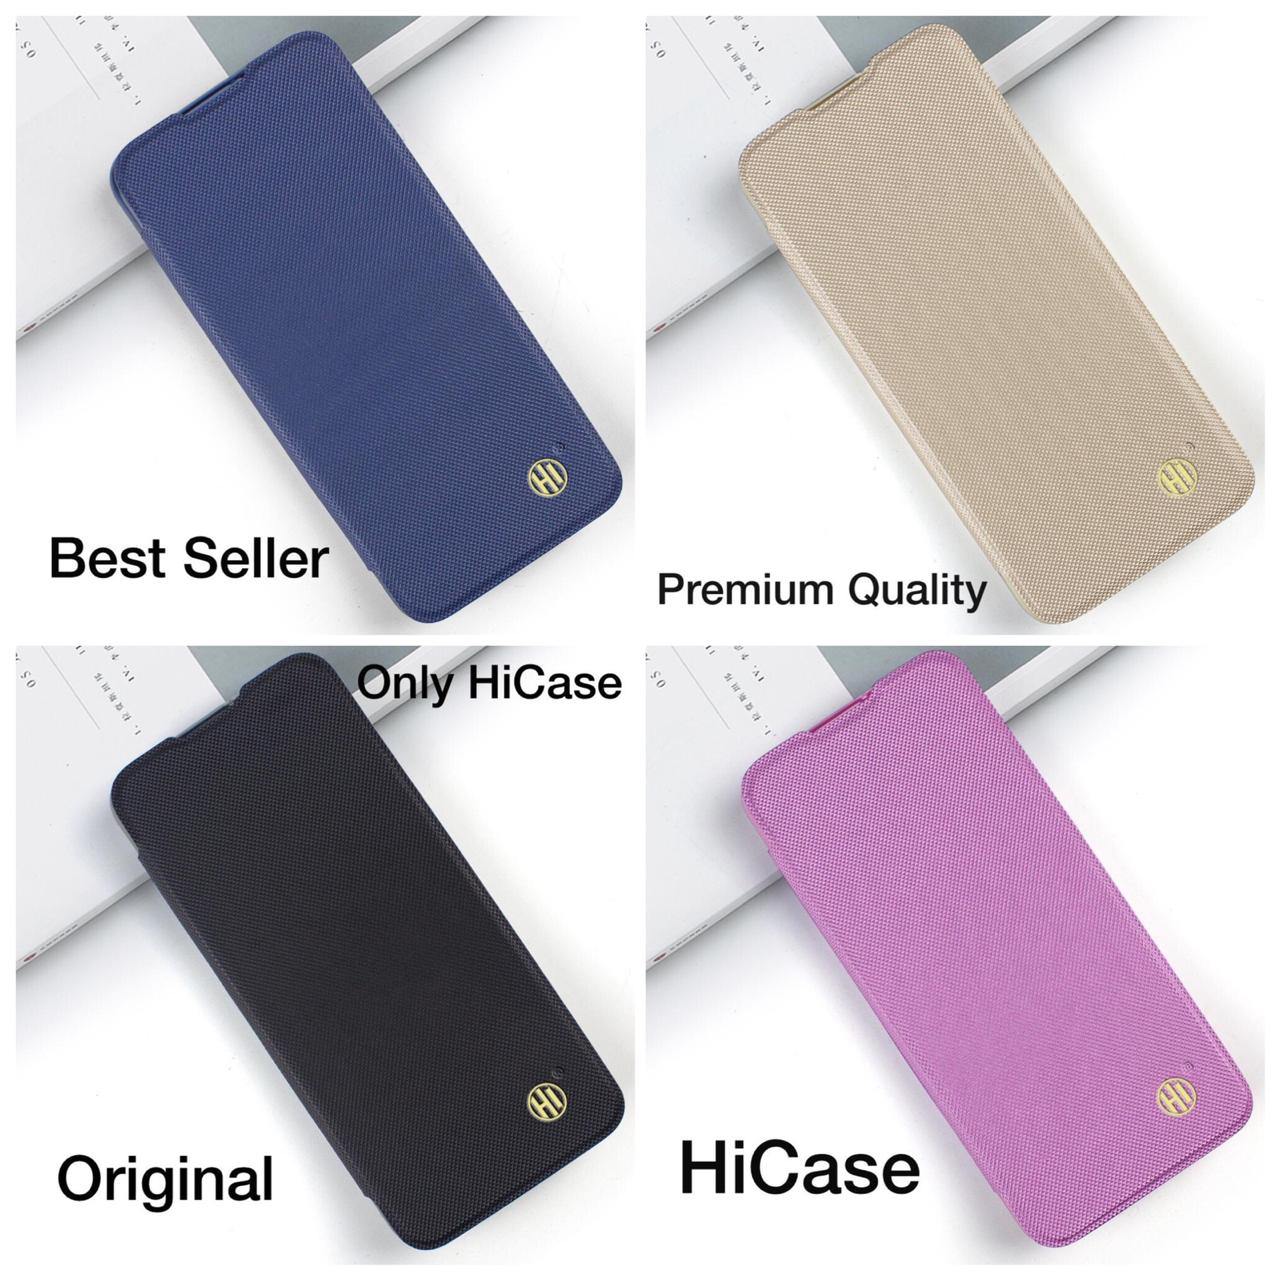 JSJM Case Flip Cover For Samsung Galaxy M20 Slim Booklet Style Mobile Cover Mobiles & Accessories